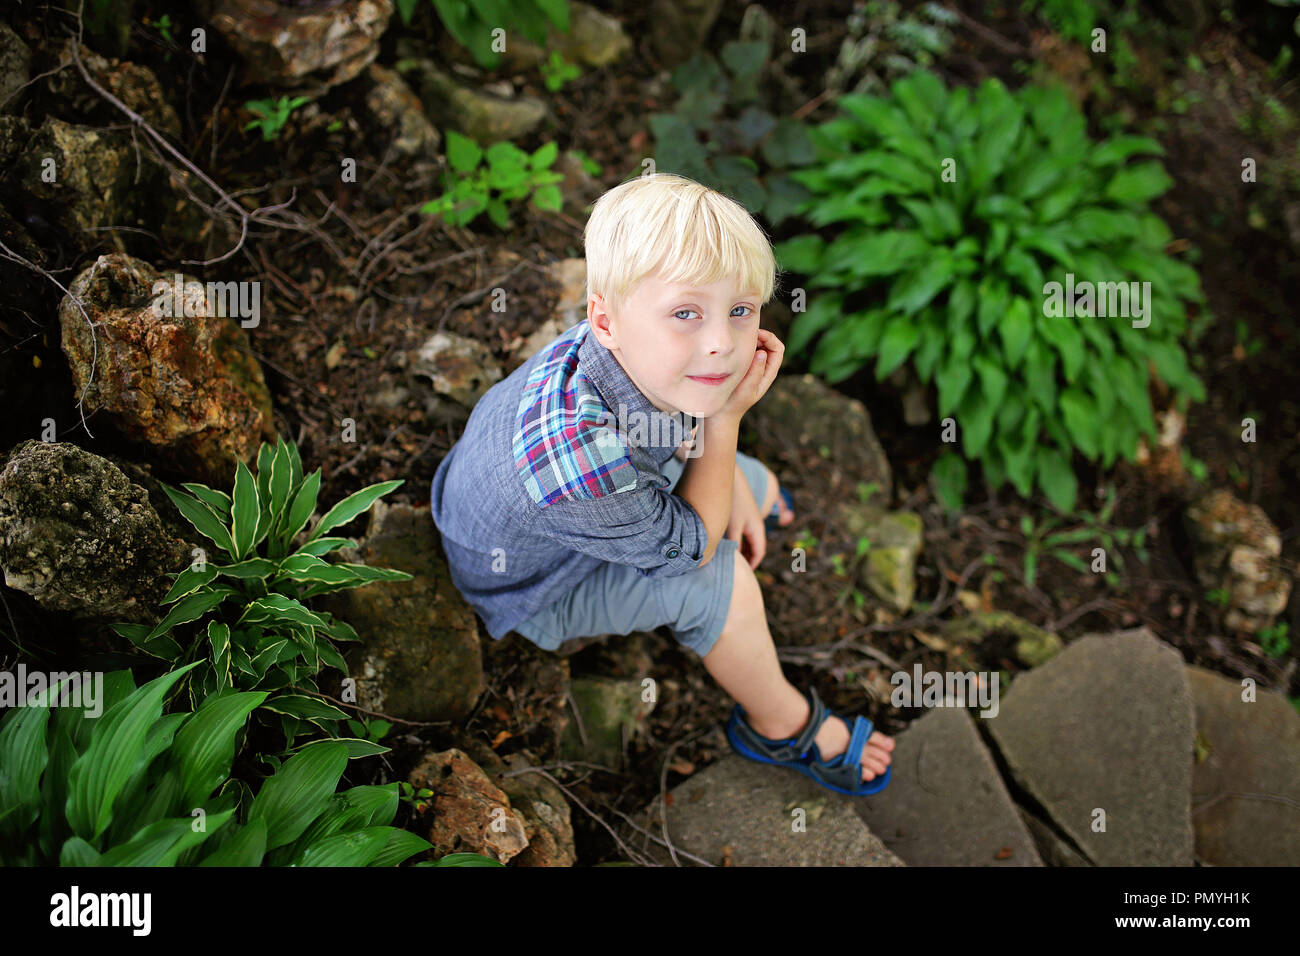 A peaceful young, 6 year old boy is sitting in a rock garden by some green hosta plants on a sumemr day. Stock Photo